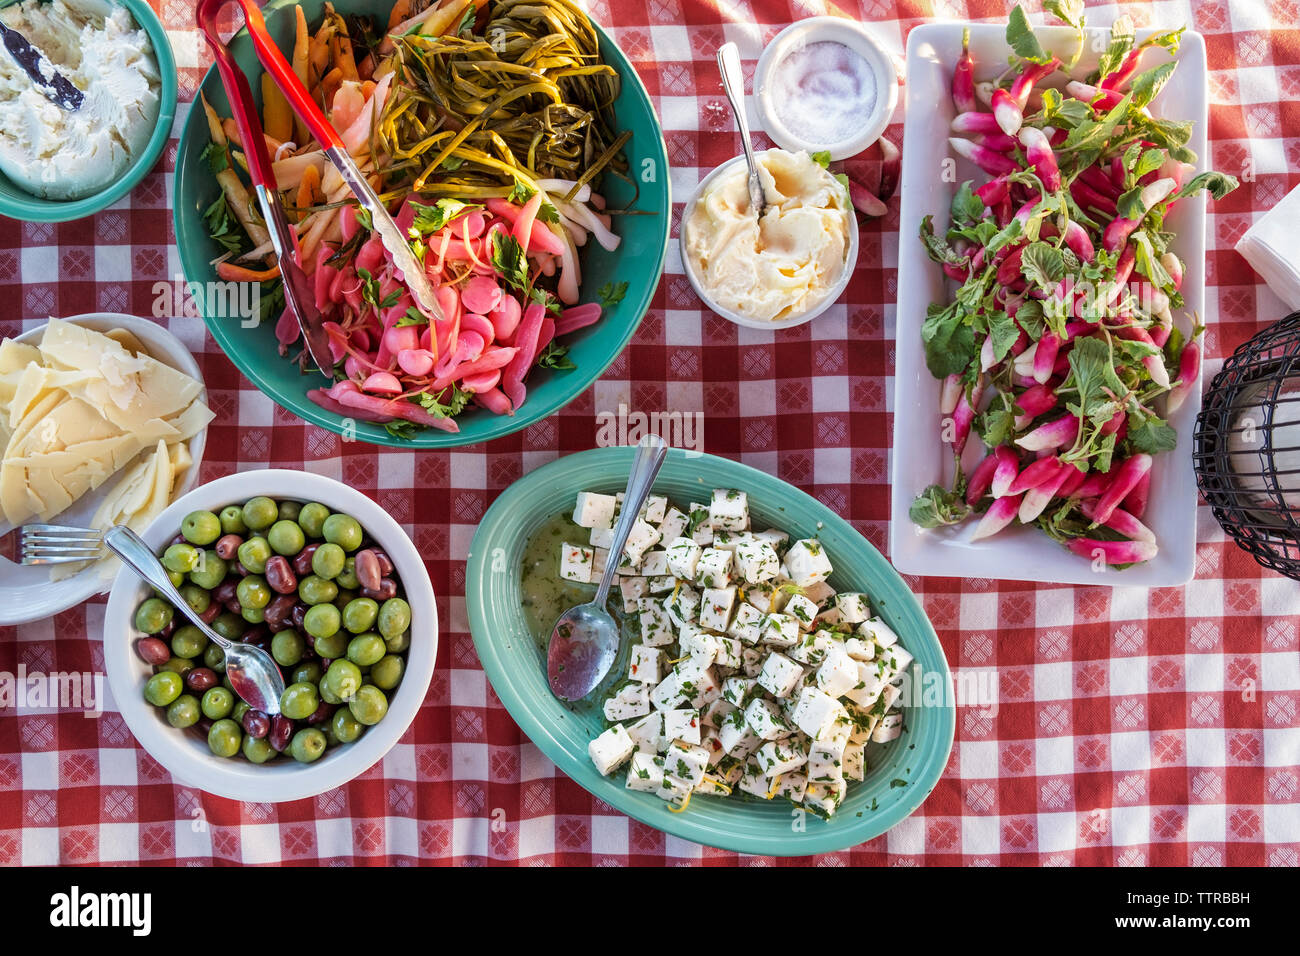 Overhead view of Antipasto served on table Stock Photo